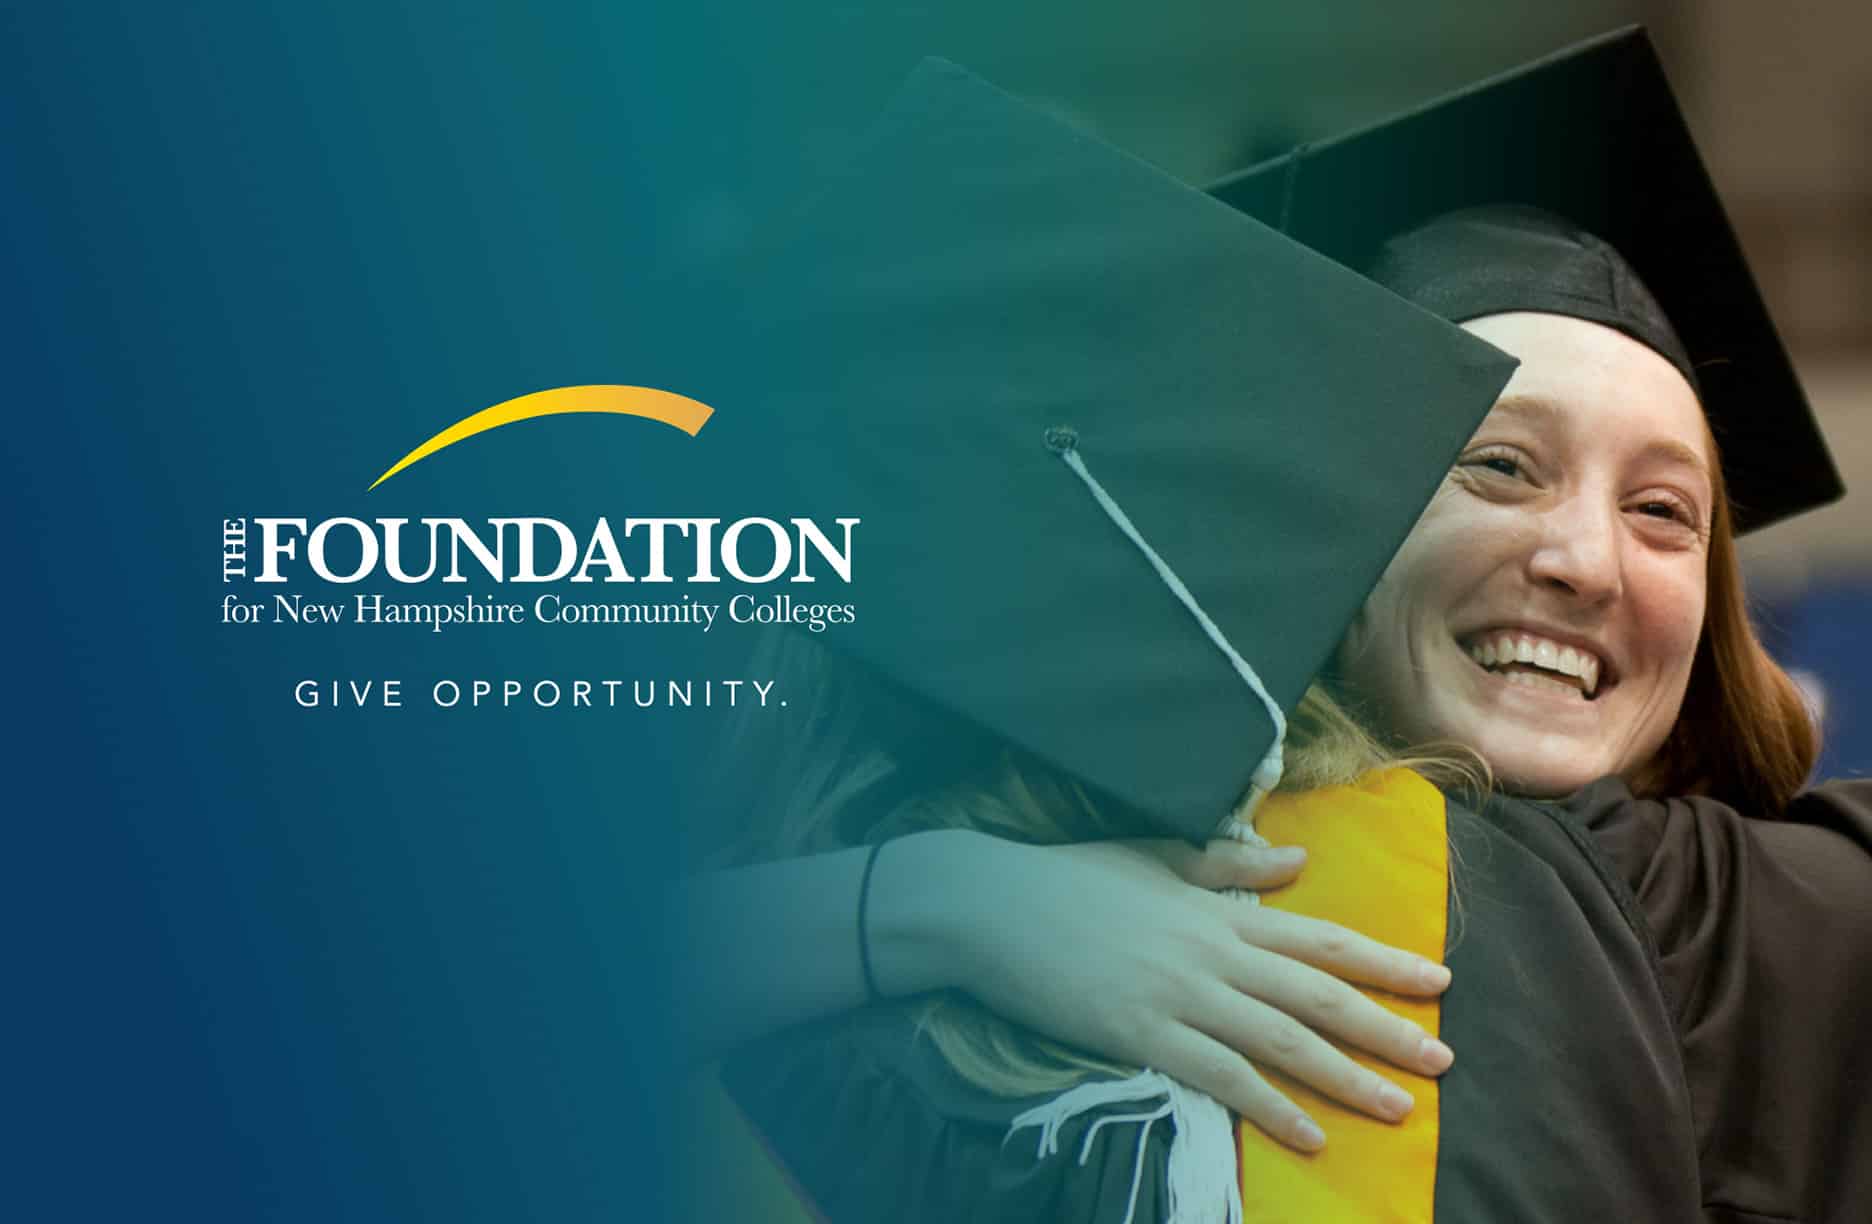 Foundation for New Hampshire Community Colleges branding and logo design, website design, story development, PR, communications by Cookson Communications